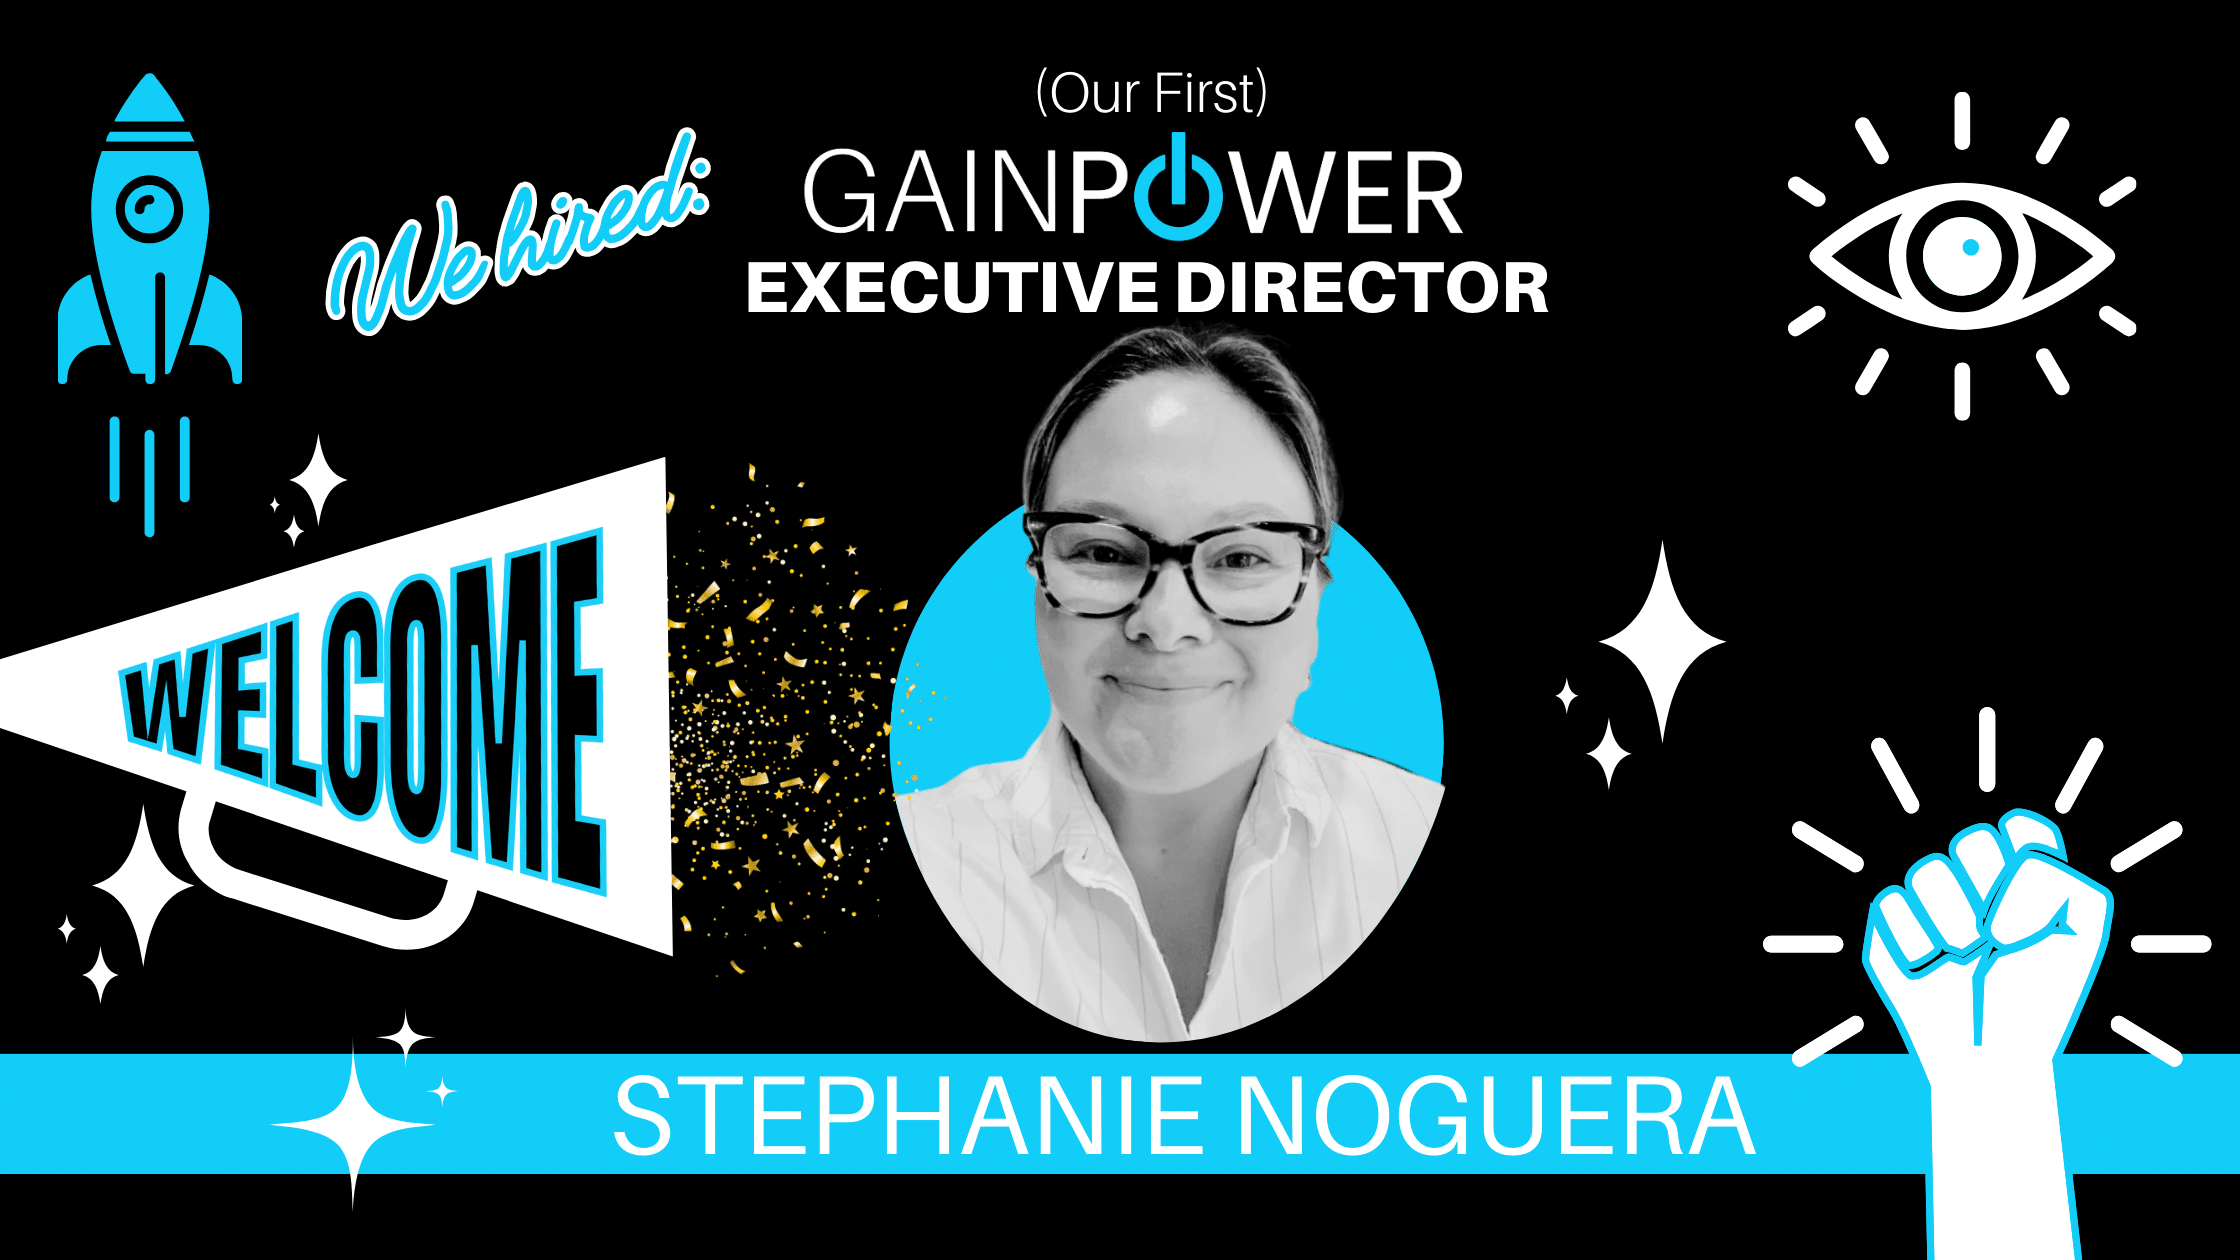 Meet our new executive director Stephanie Noguera